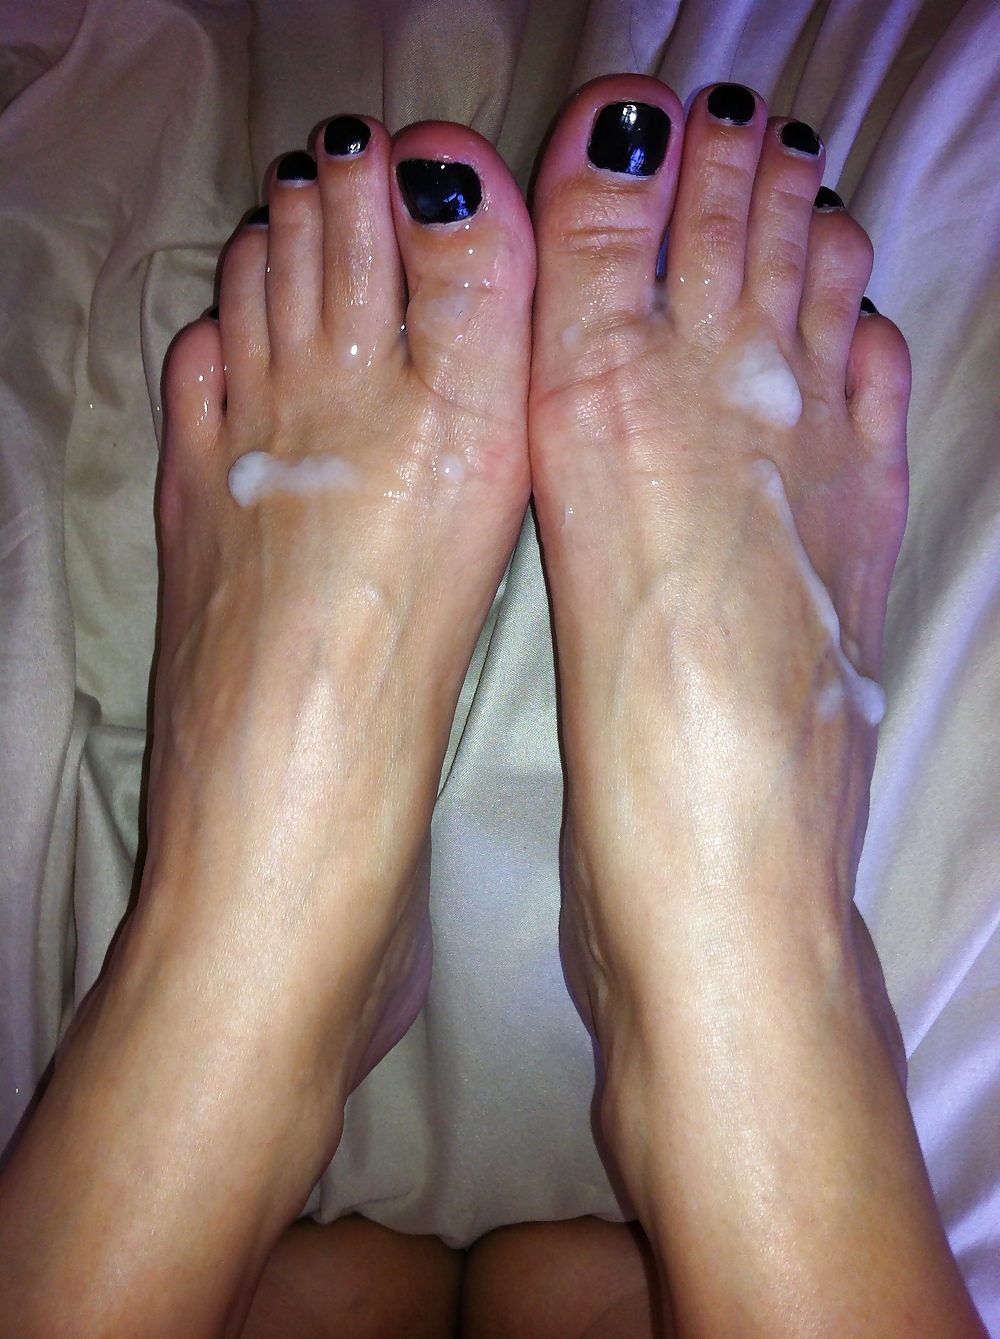 Had to cum over her beautiful feet again i luv it #12009798